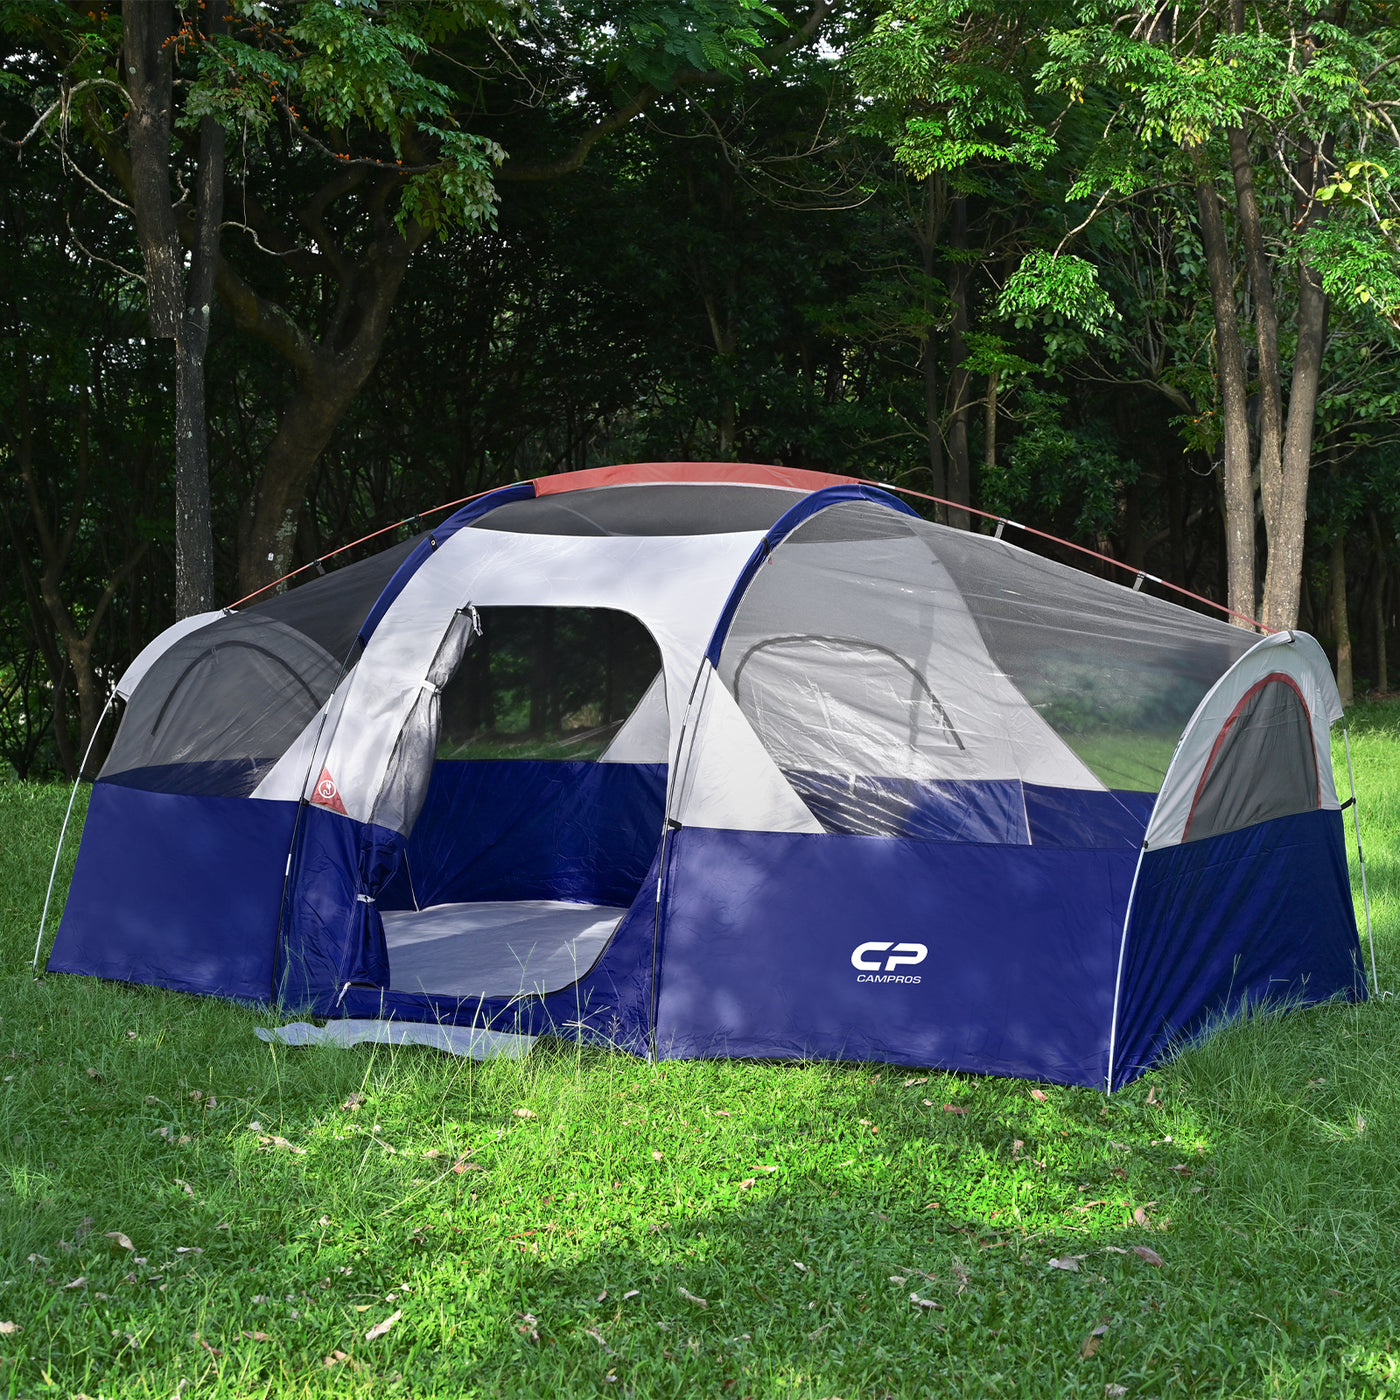  CAMPROS Tent-8-Person-Camping-Tents, Waterproof